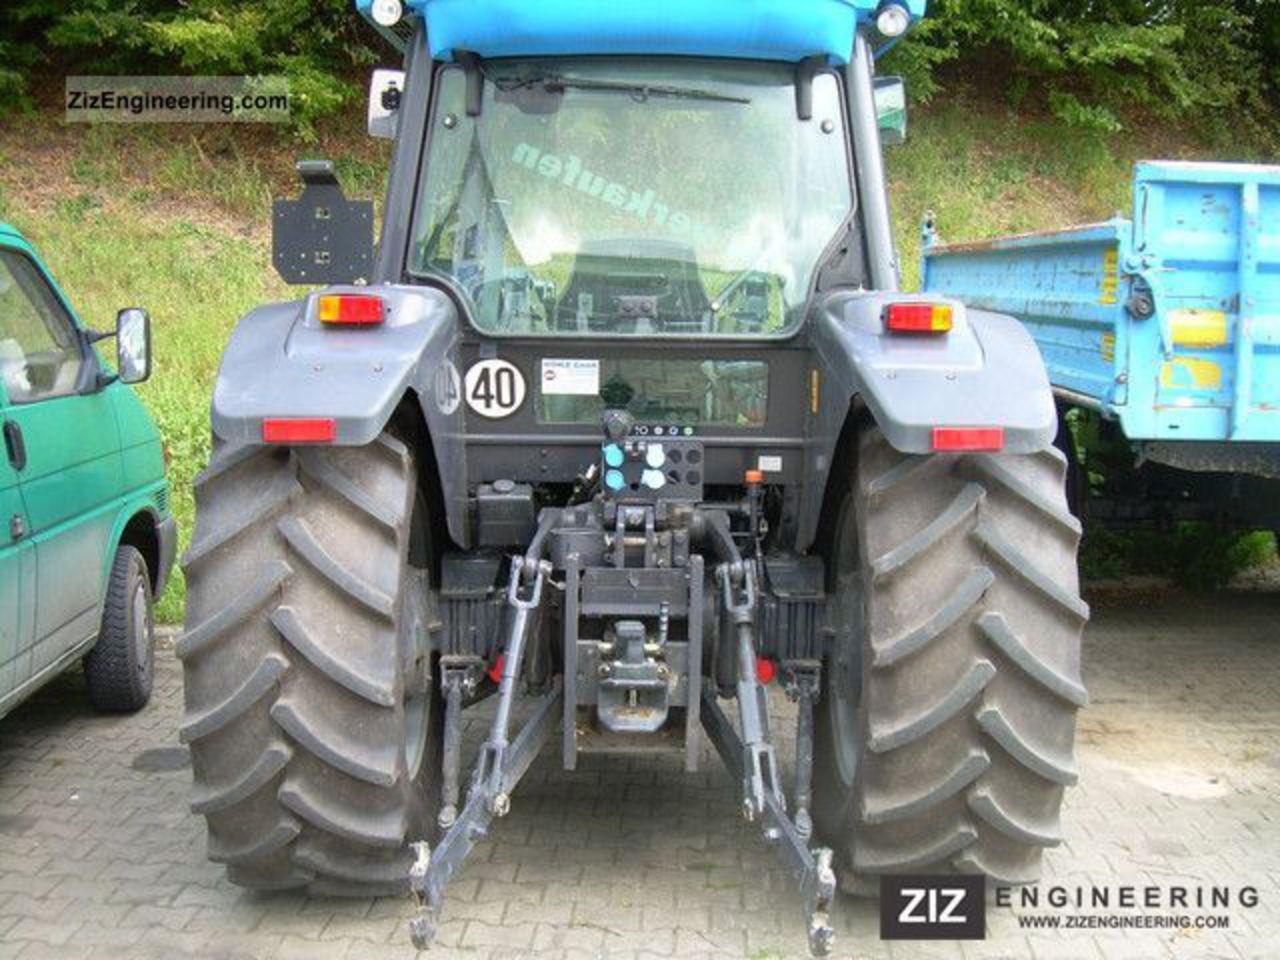 Landini Powerfarm 95 2008 Agricultural Tractor Photo and Specs